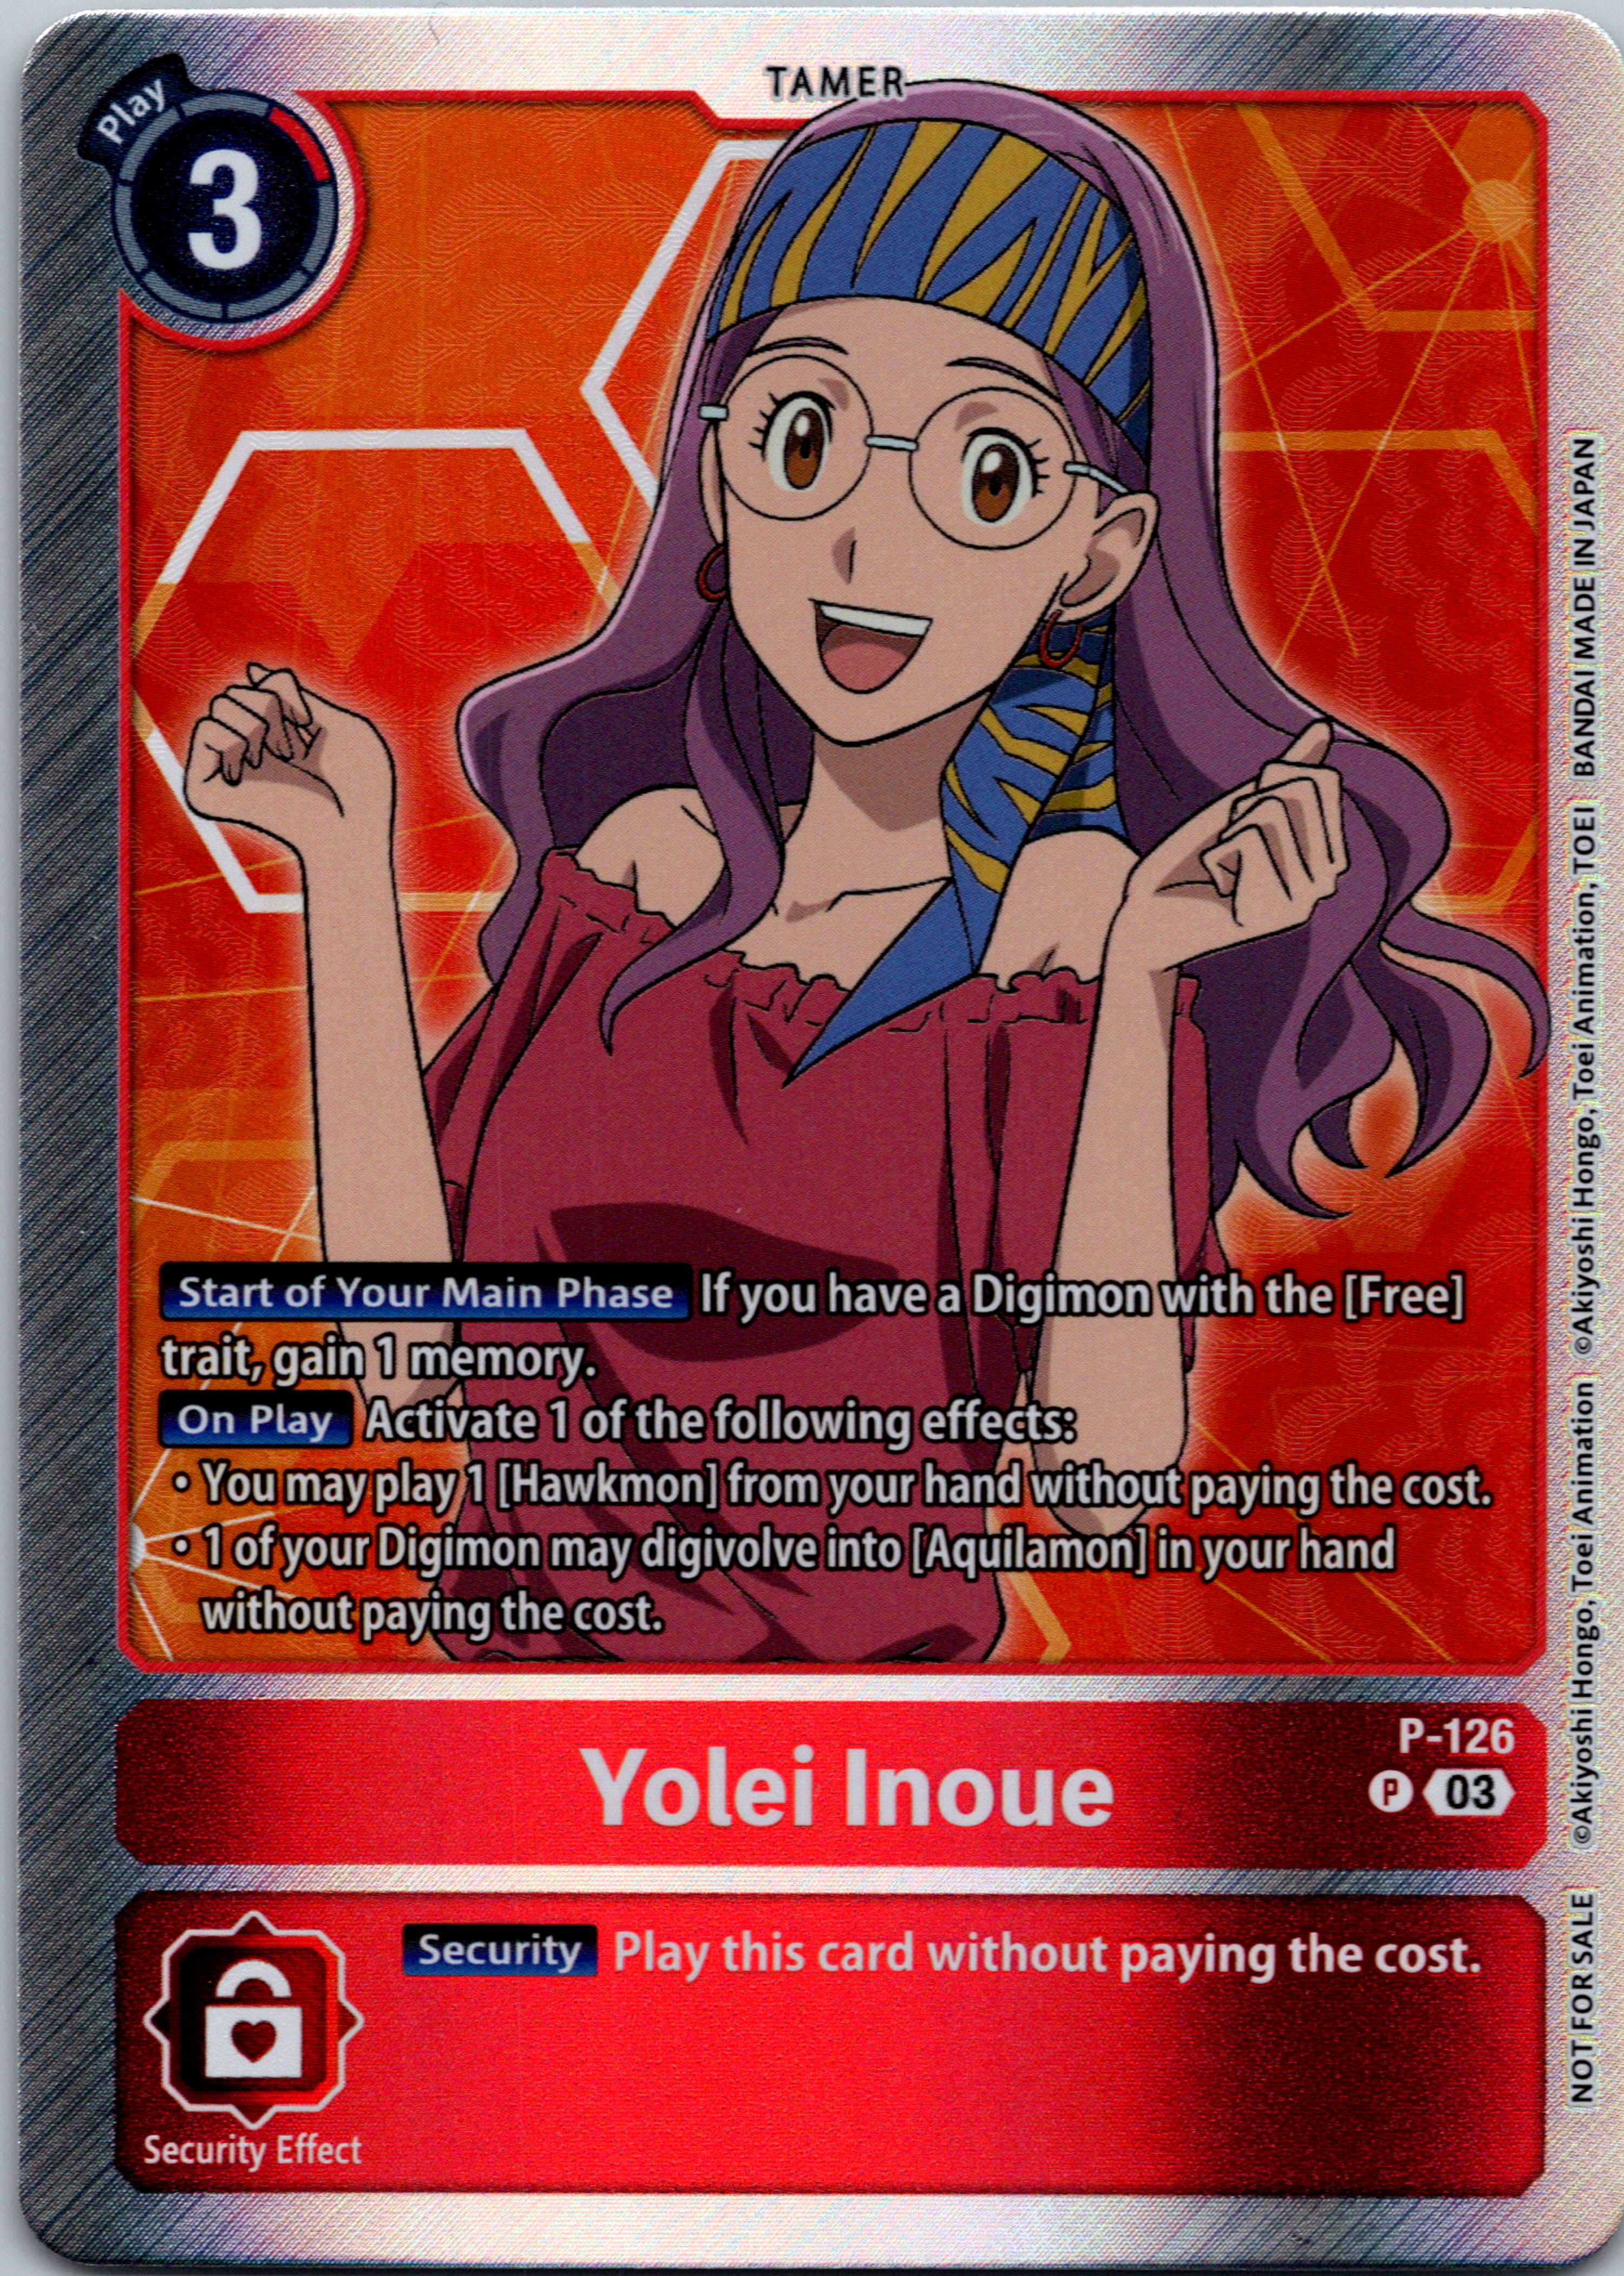 Yolei Inoue - P-126 (Tamer Party Pack -The Beginning- Ver. 2.0) [P-126] [Digimon Promotion Cards] Foil